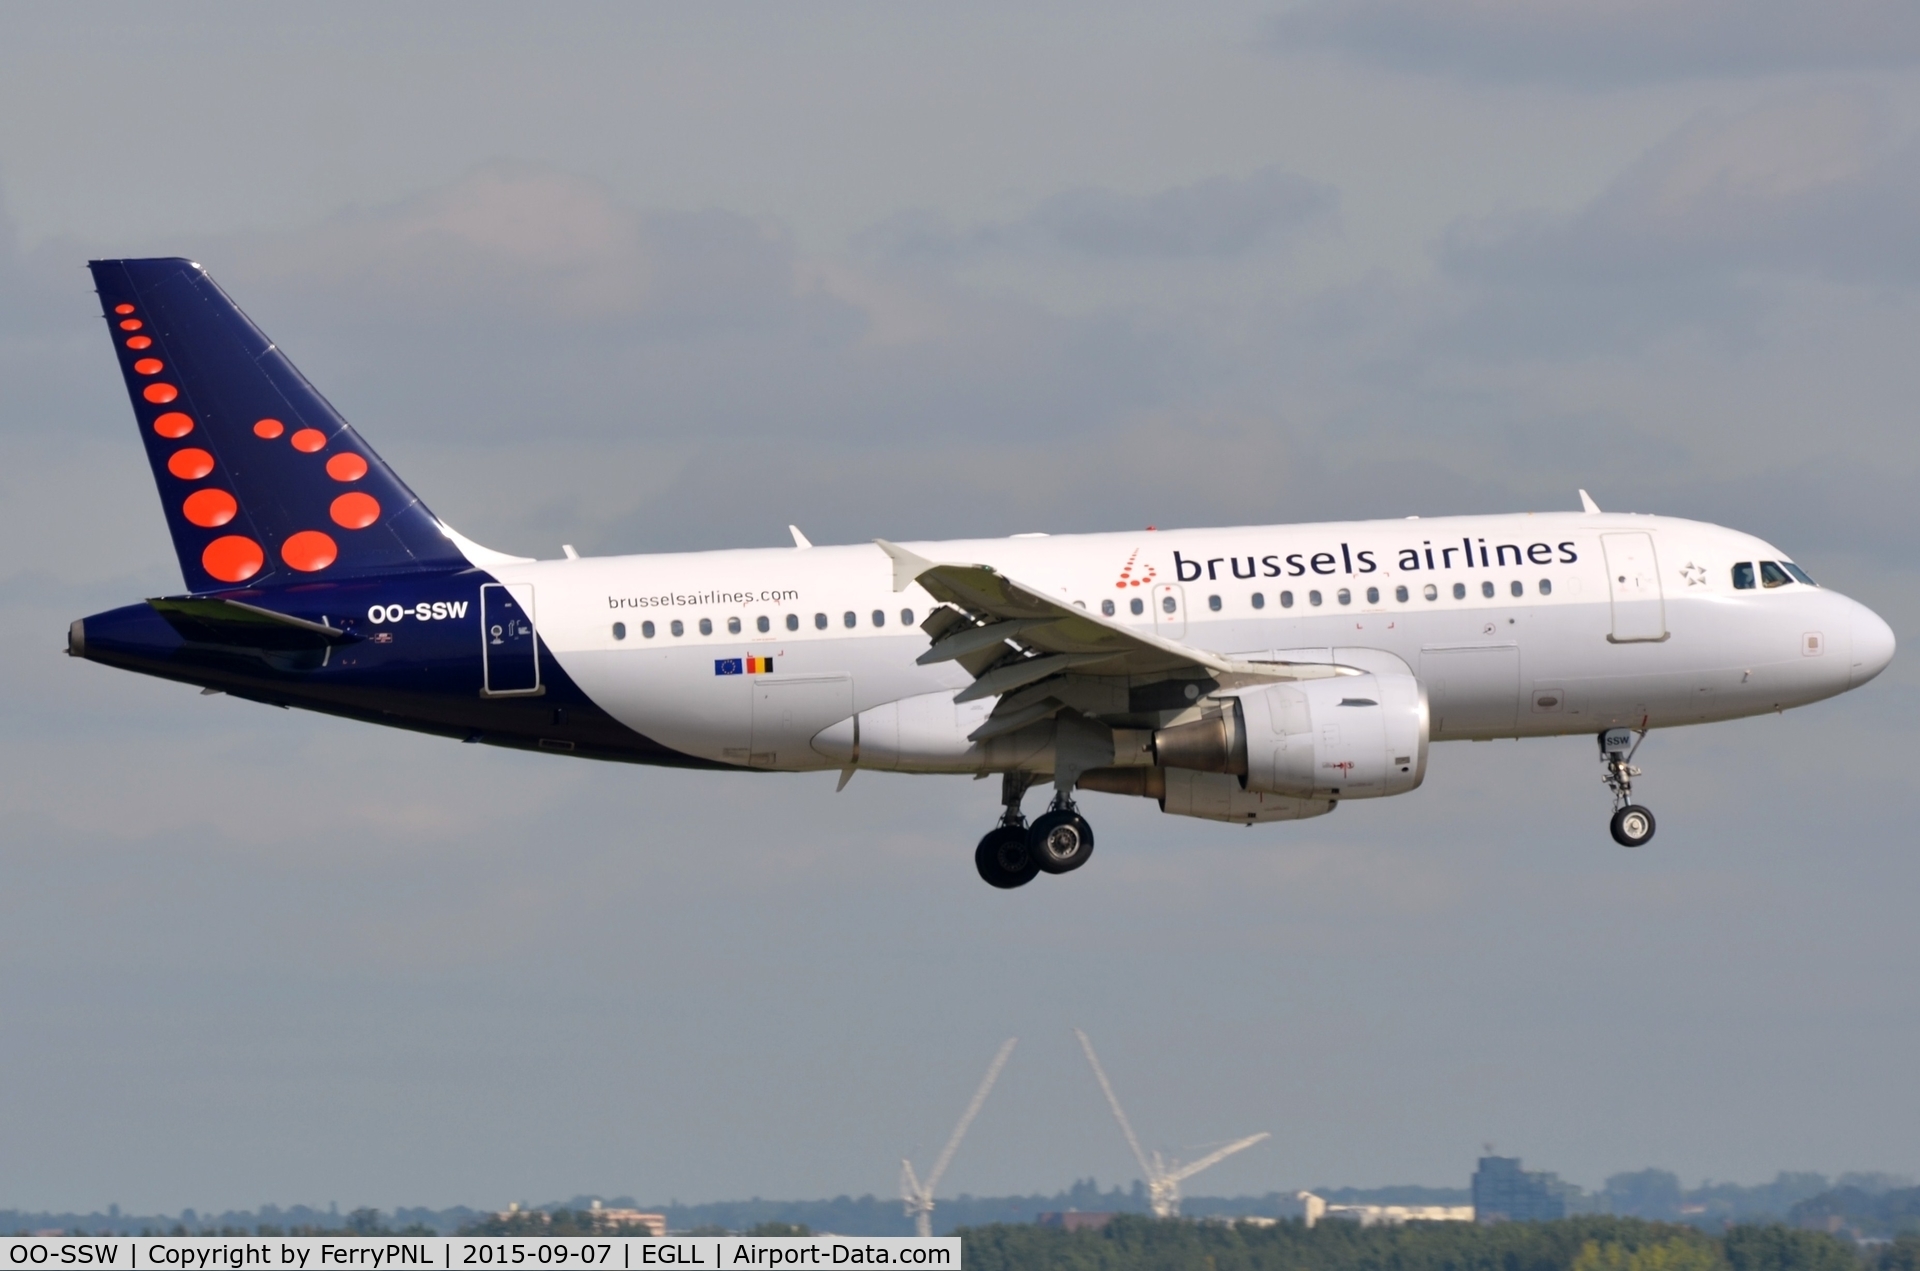 OO-SSW, 2007 Airbus A319-111 C/N 3255, Brussels A319